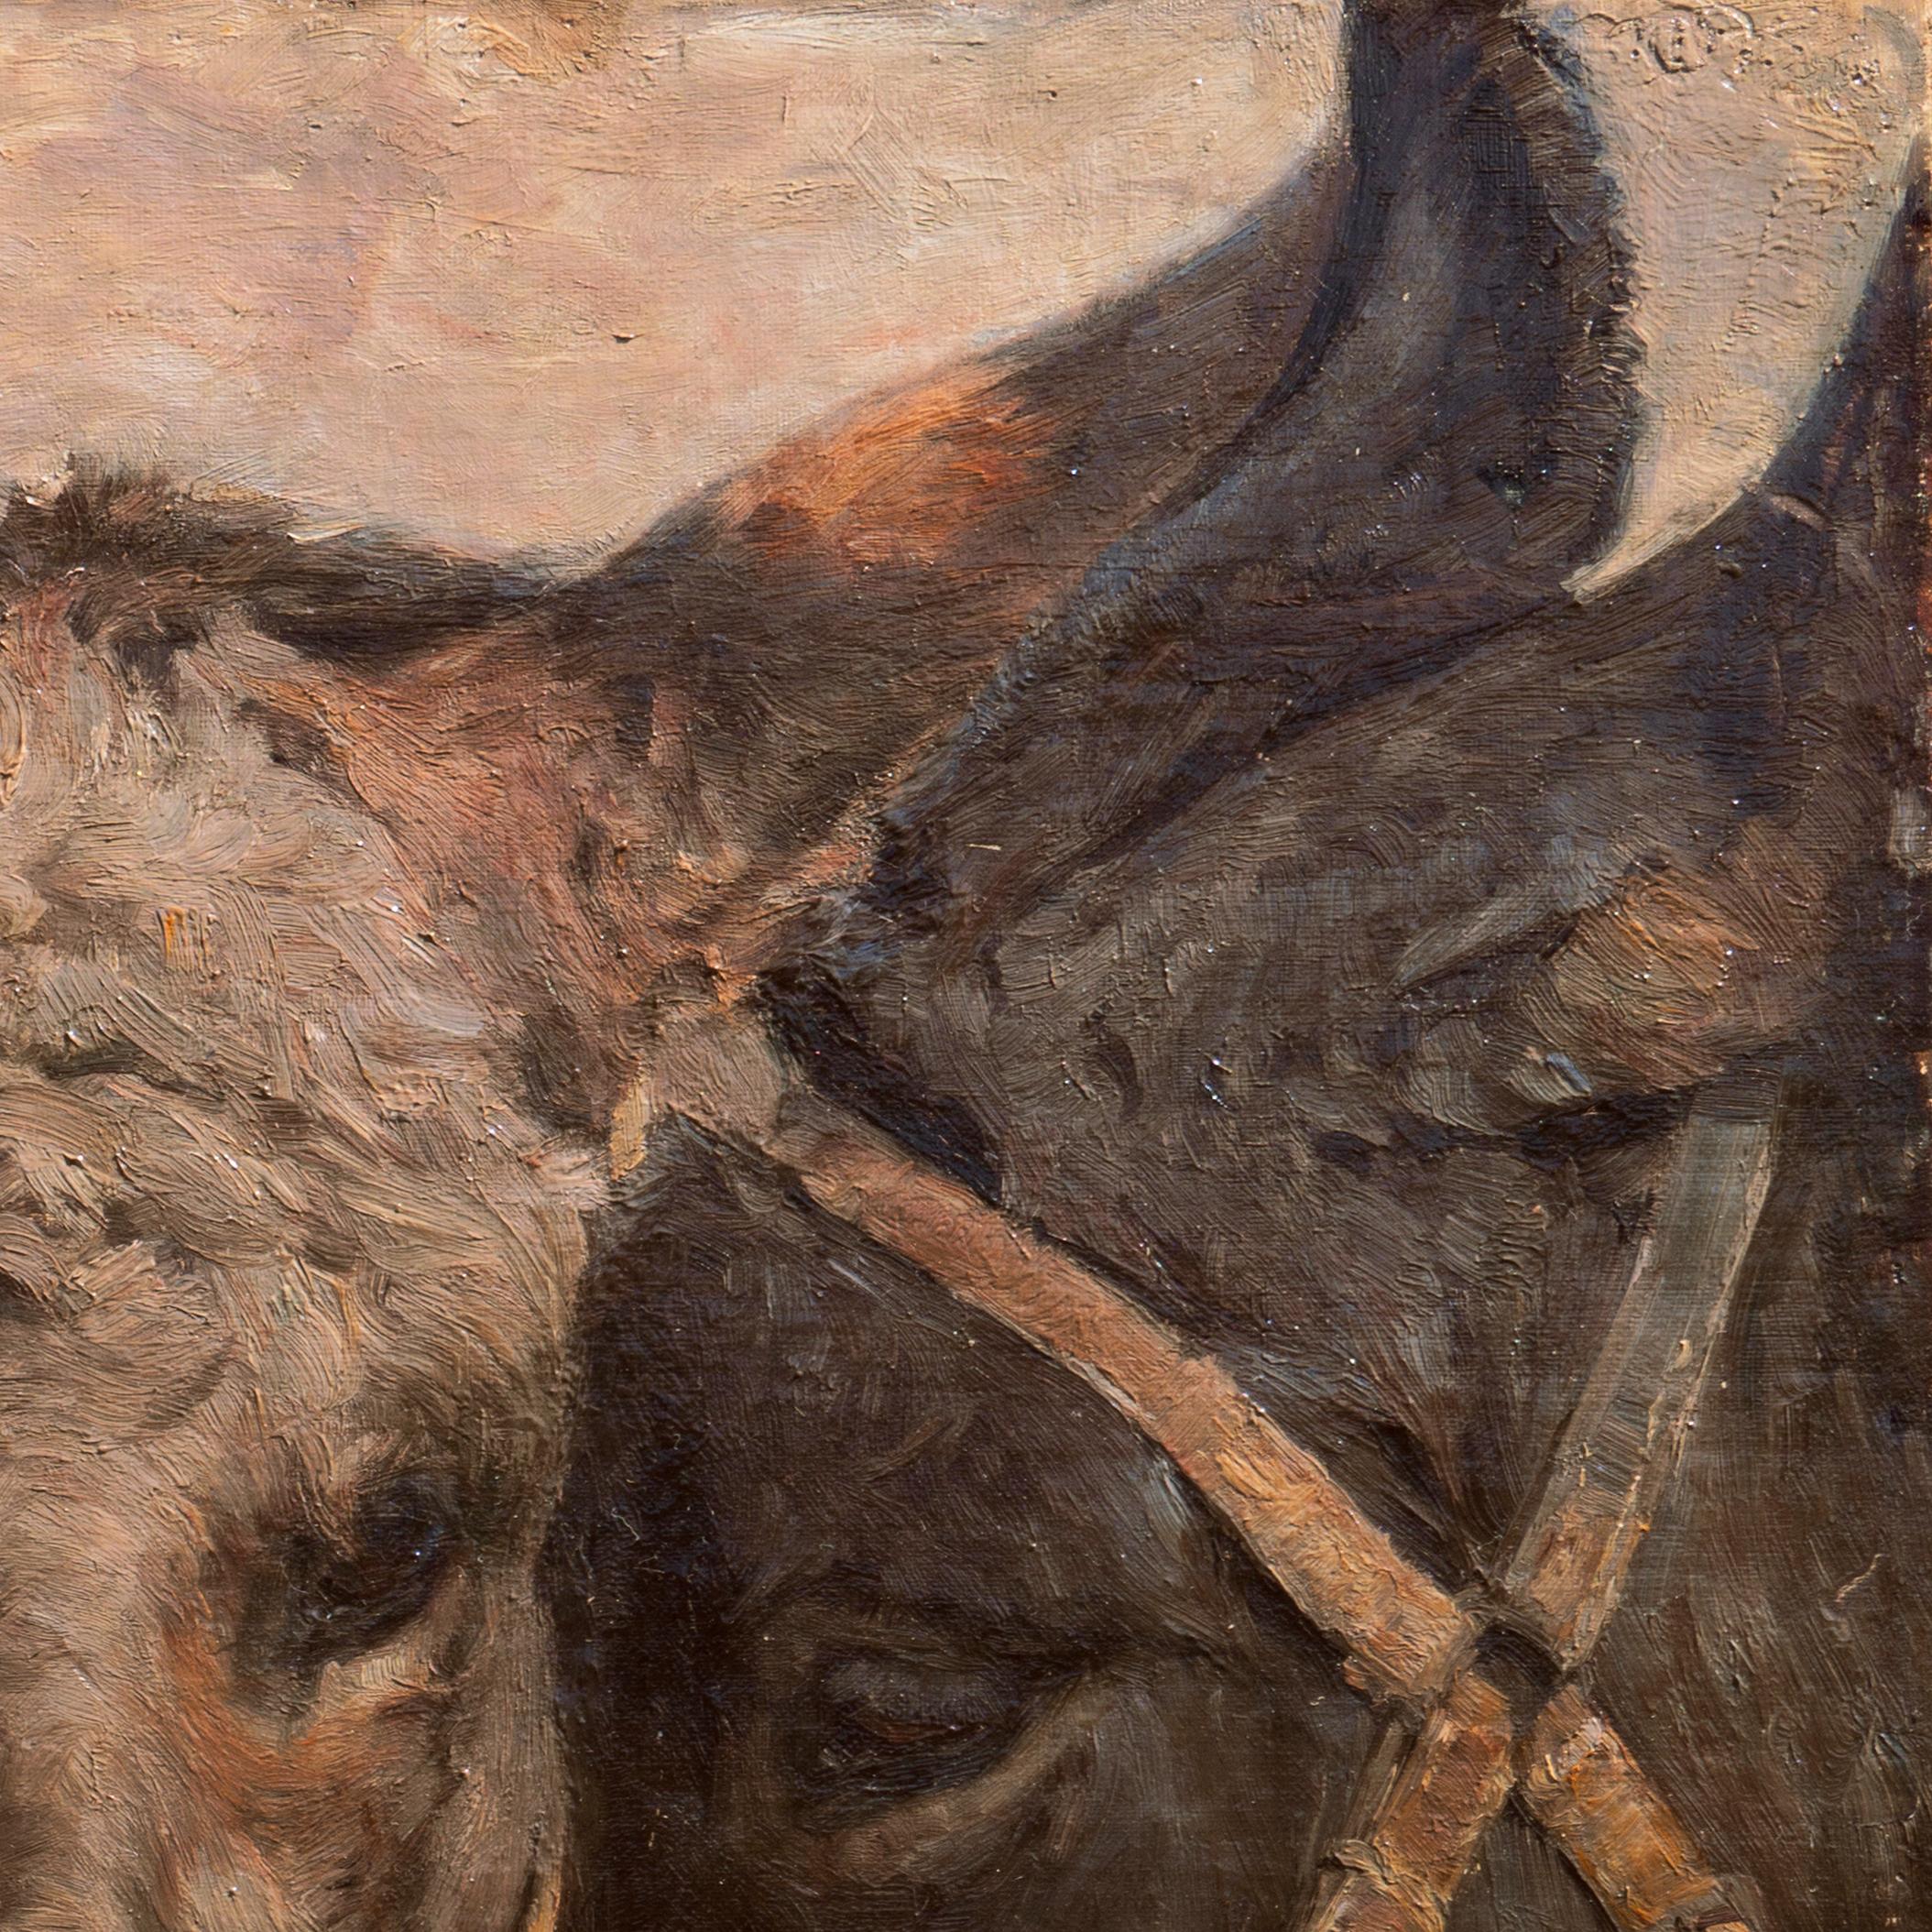 A fine, late 19th century oil painting showing a young Italian farm girl holding the bridle of a favorite grey donkey and nuzzling his muzzle while a chestnut donkey stands beside her.  
Signed lower left, 